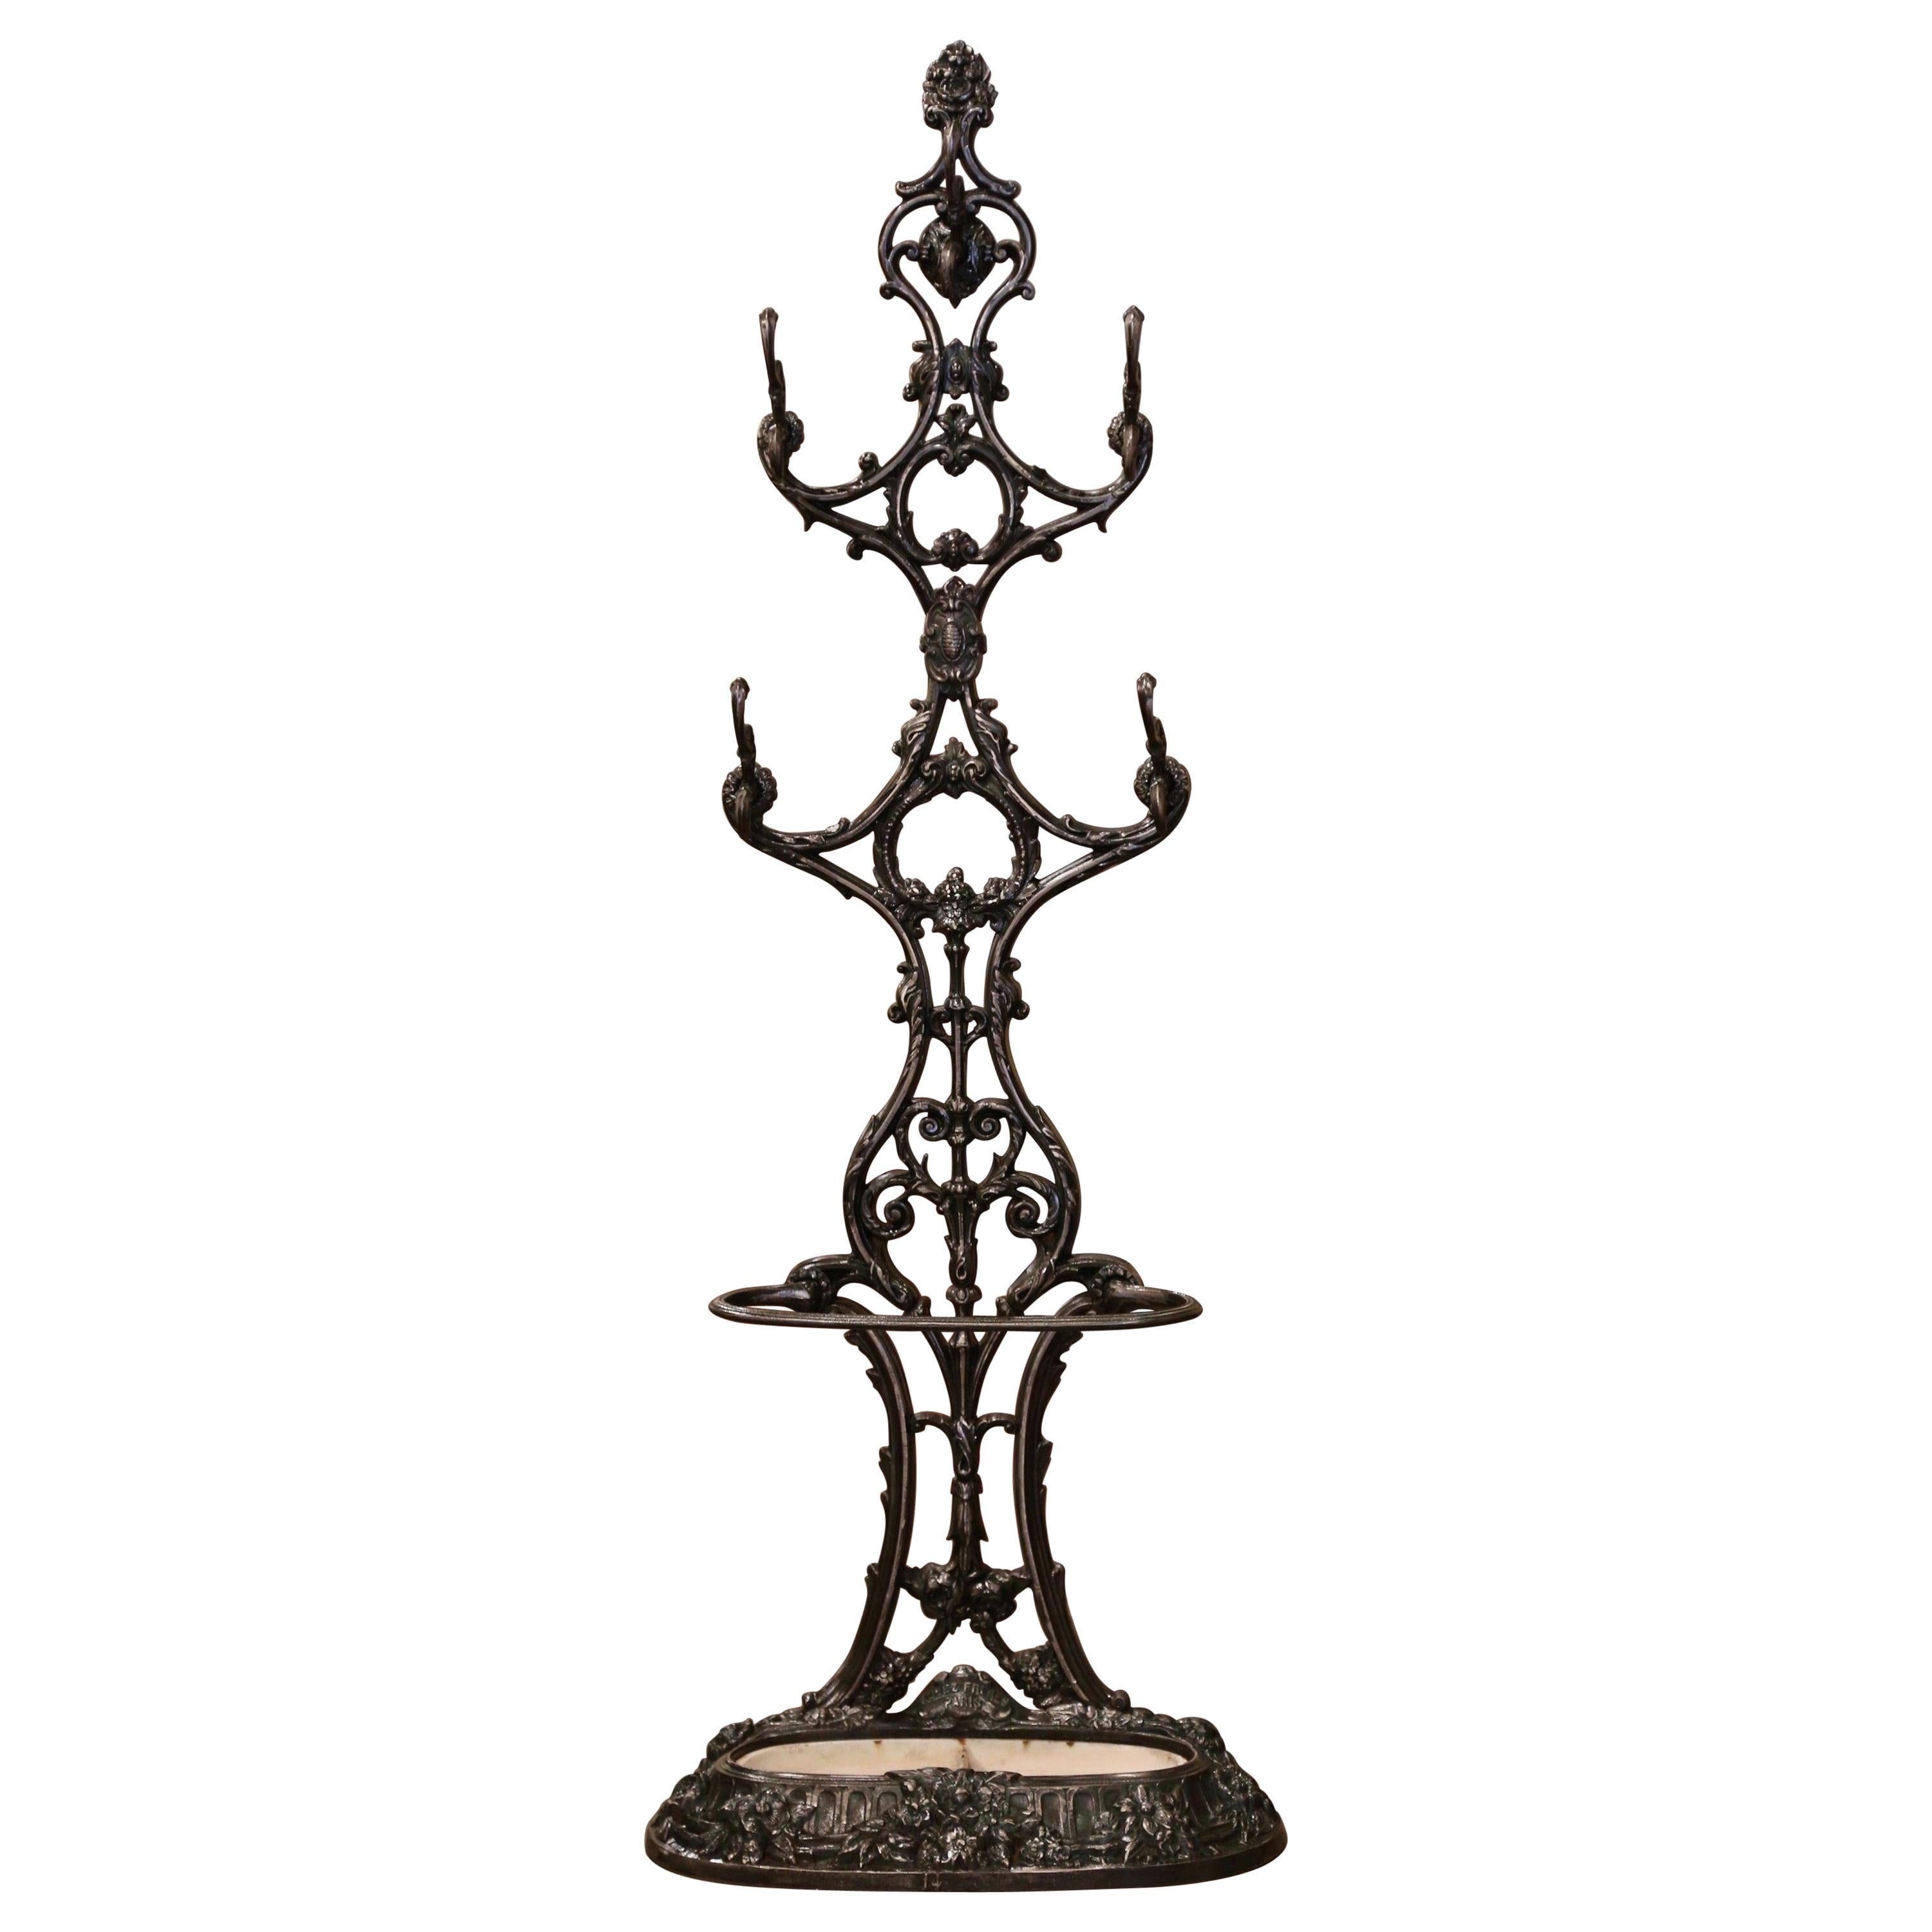 19th Century French Polished Cast Iron Hall Stand Signed Allez Freres, Paris